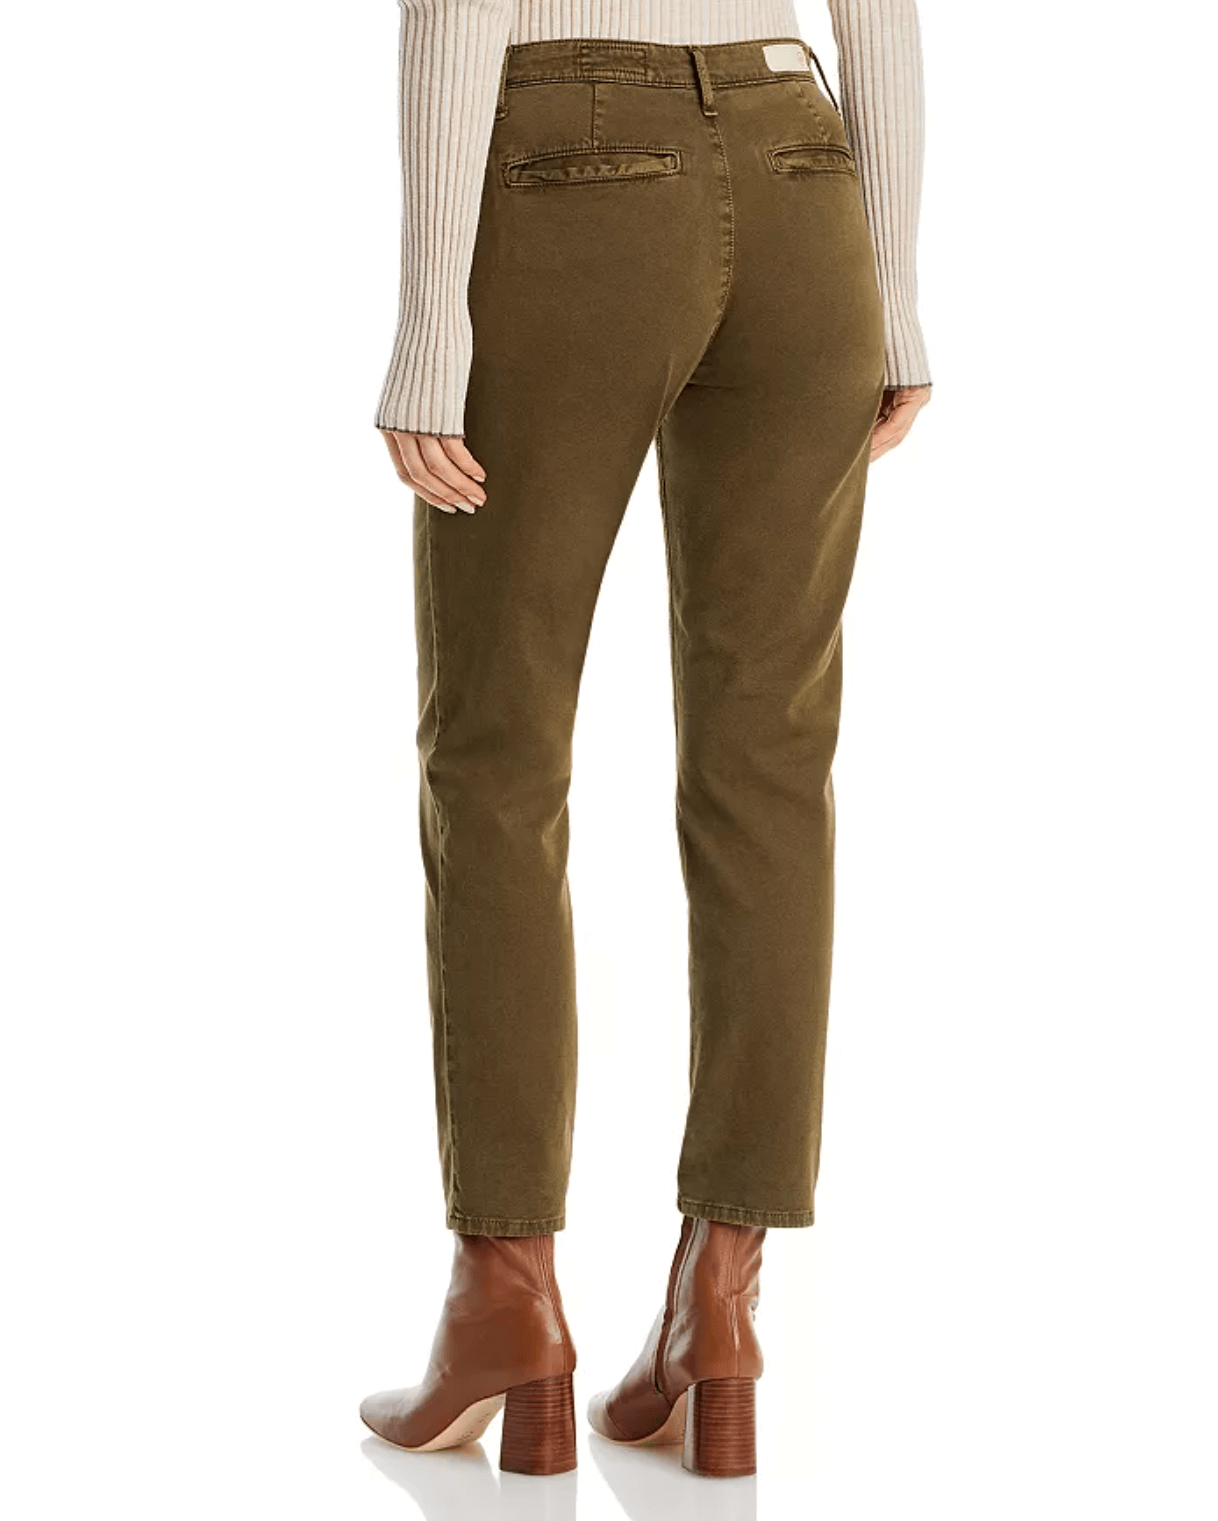 AG jeans caden tailored trouser in shady moss, rear view